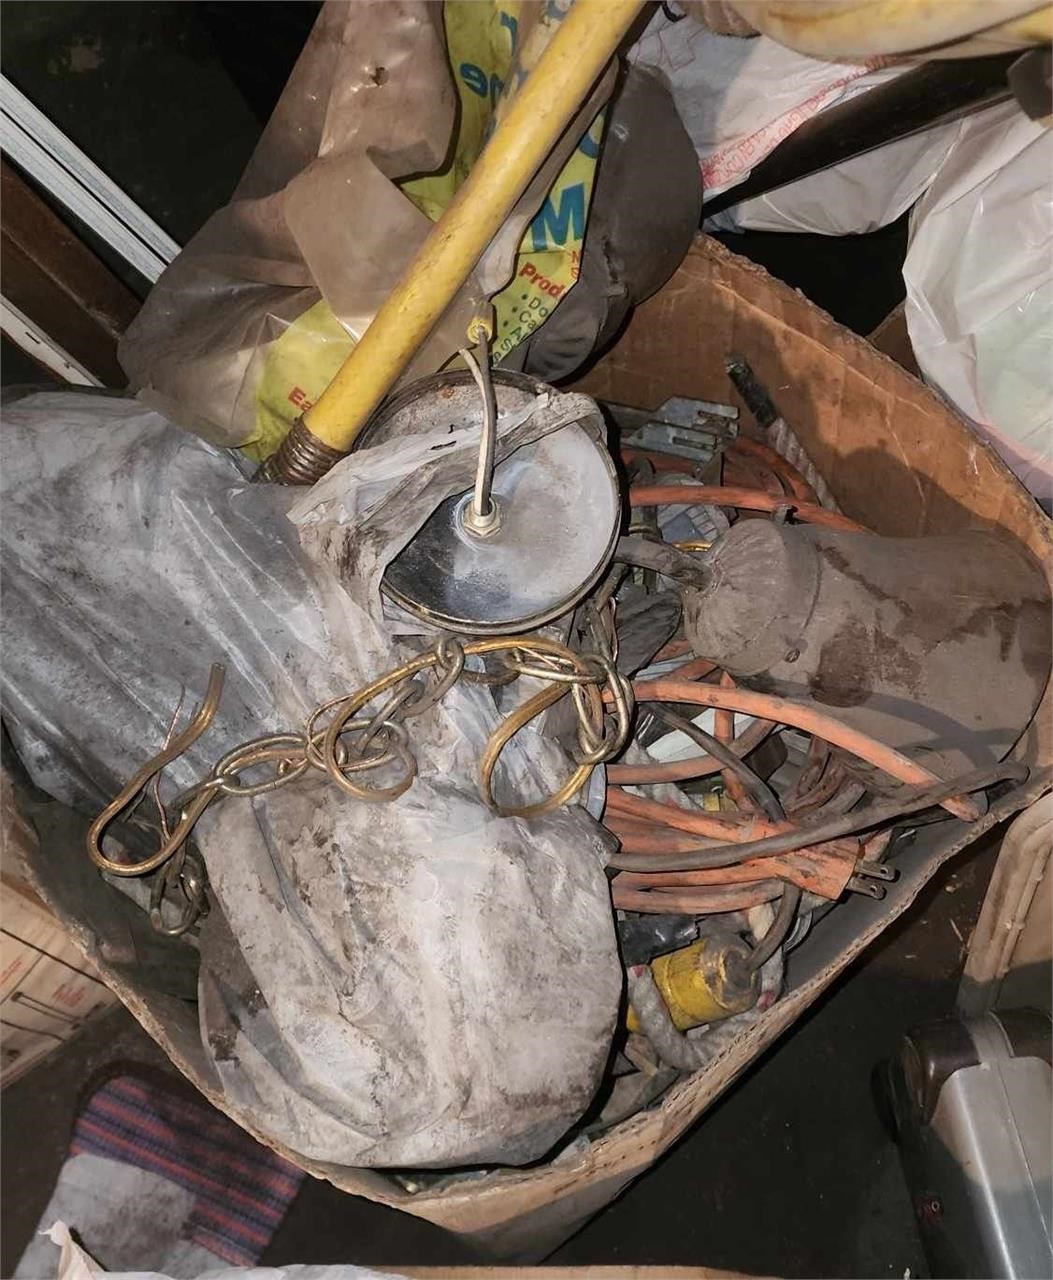 Box of extension cords/rope/misc.